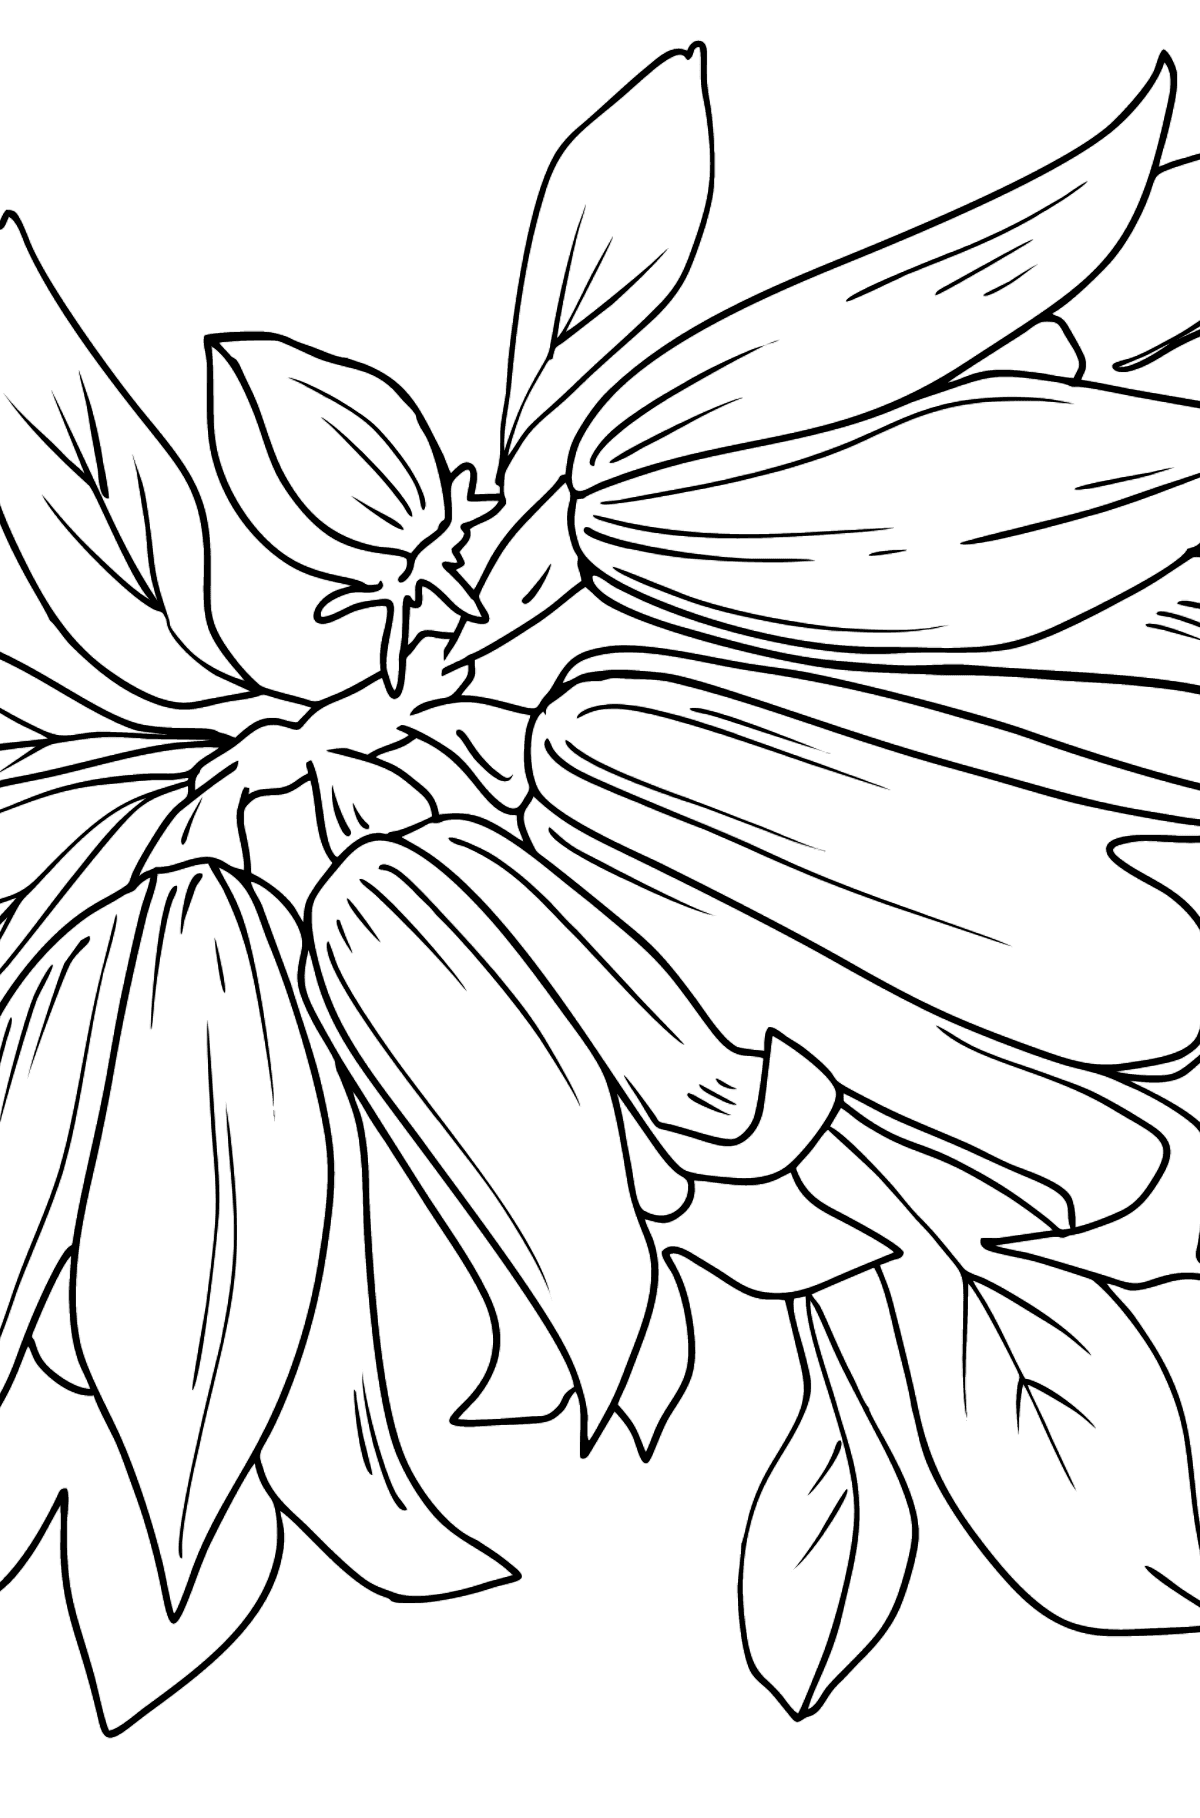 Flower Coloring Page - Bells - Coloring Pages for Kids